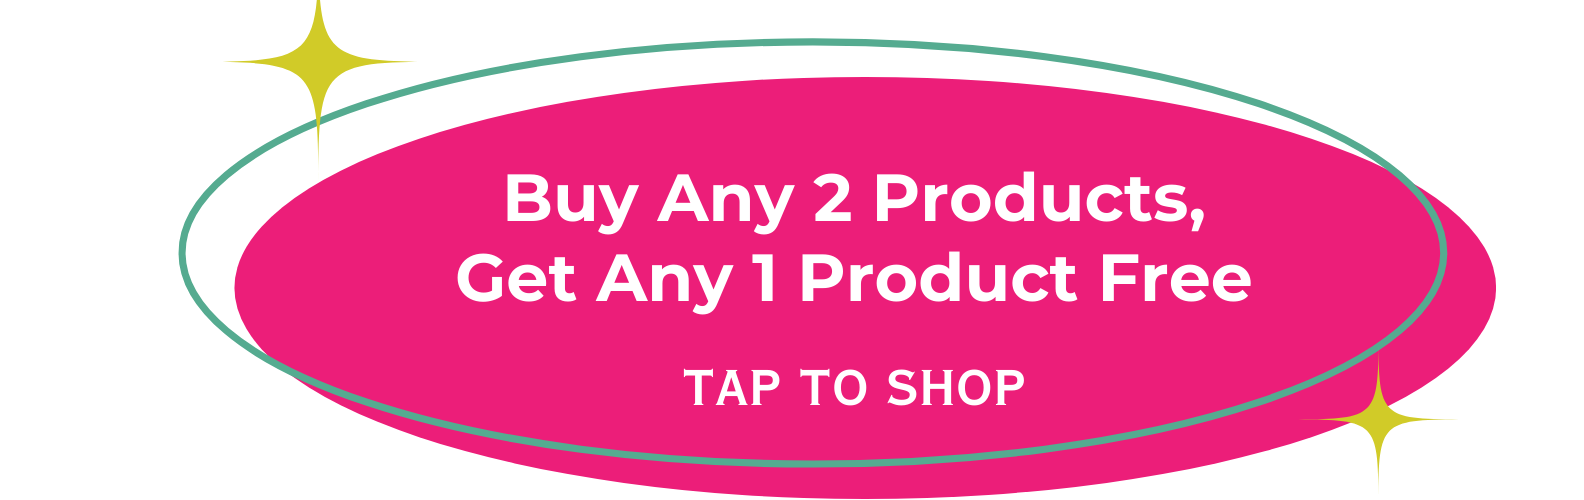 Buy any 2 products get any 1 product free